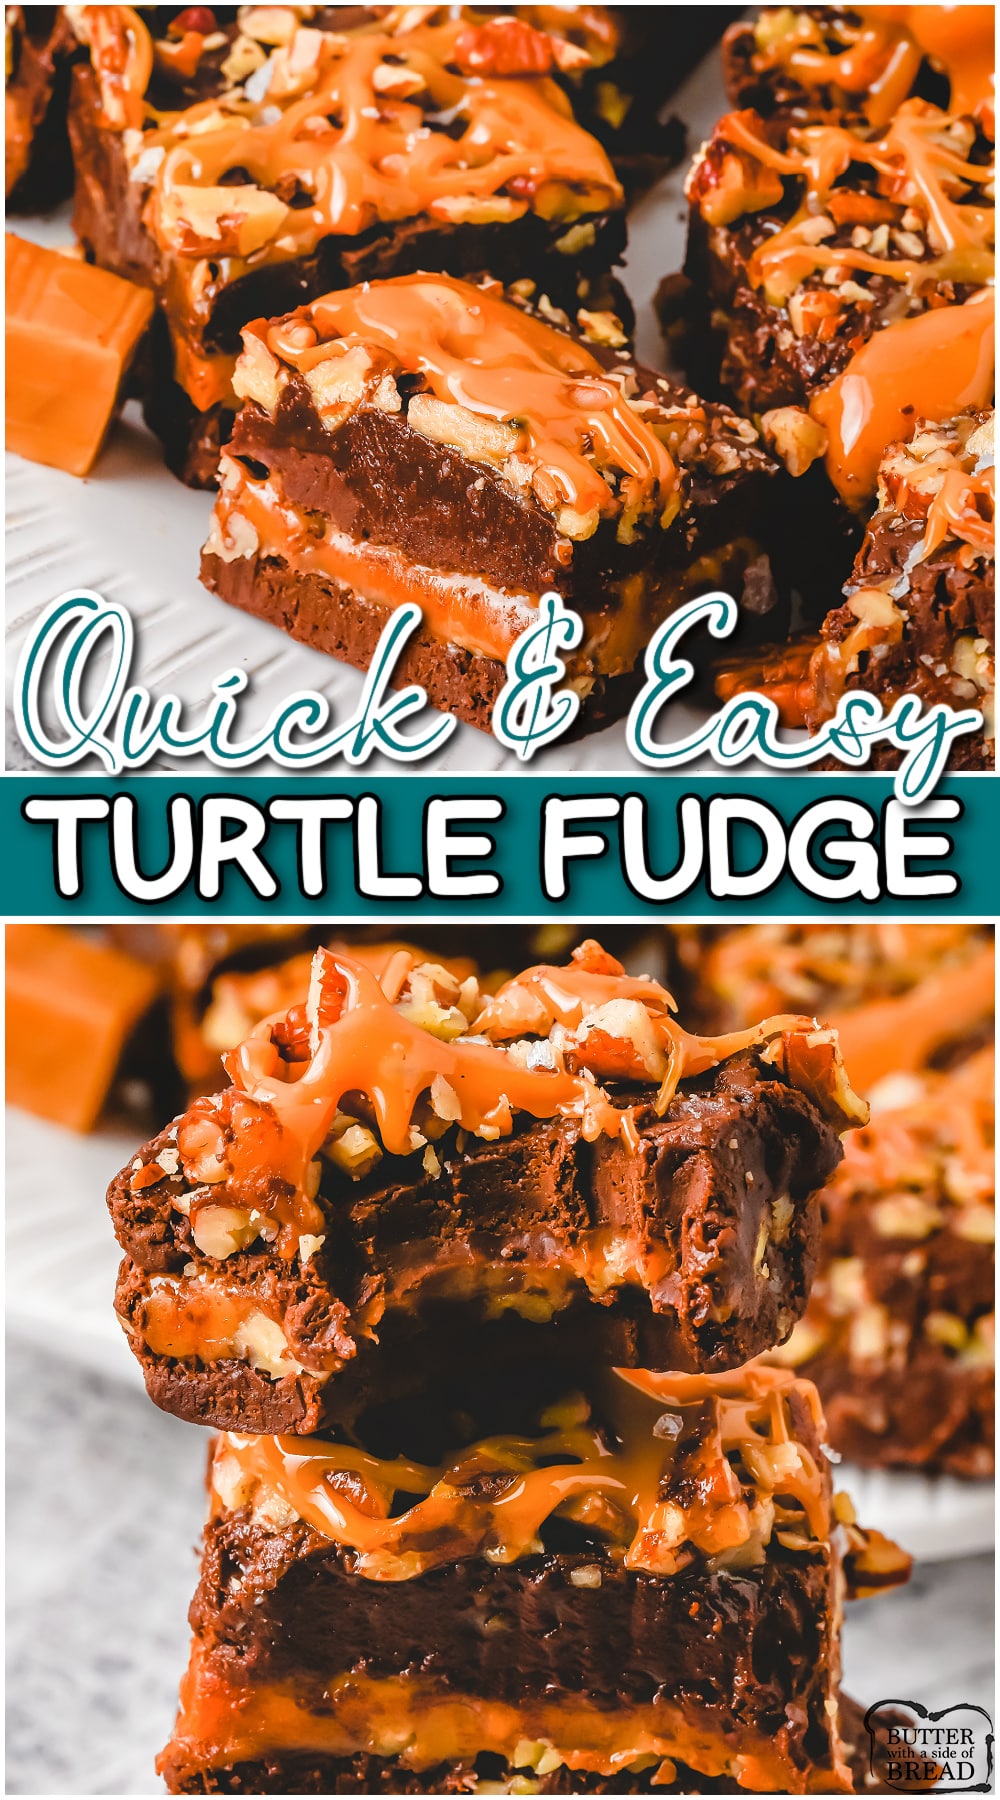 Turtle fudge recipe made with layers of smooth chocolate fudge, crunchy pecans, & creamy caramels. Caramel pecan fudge perfect for holiday dessert trays!